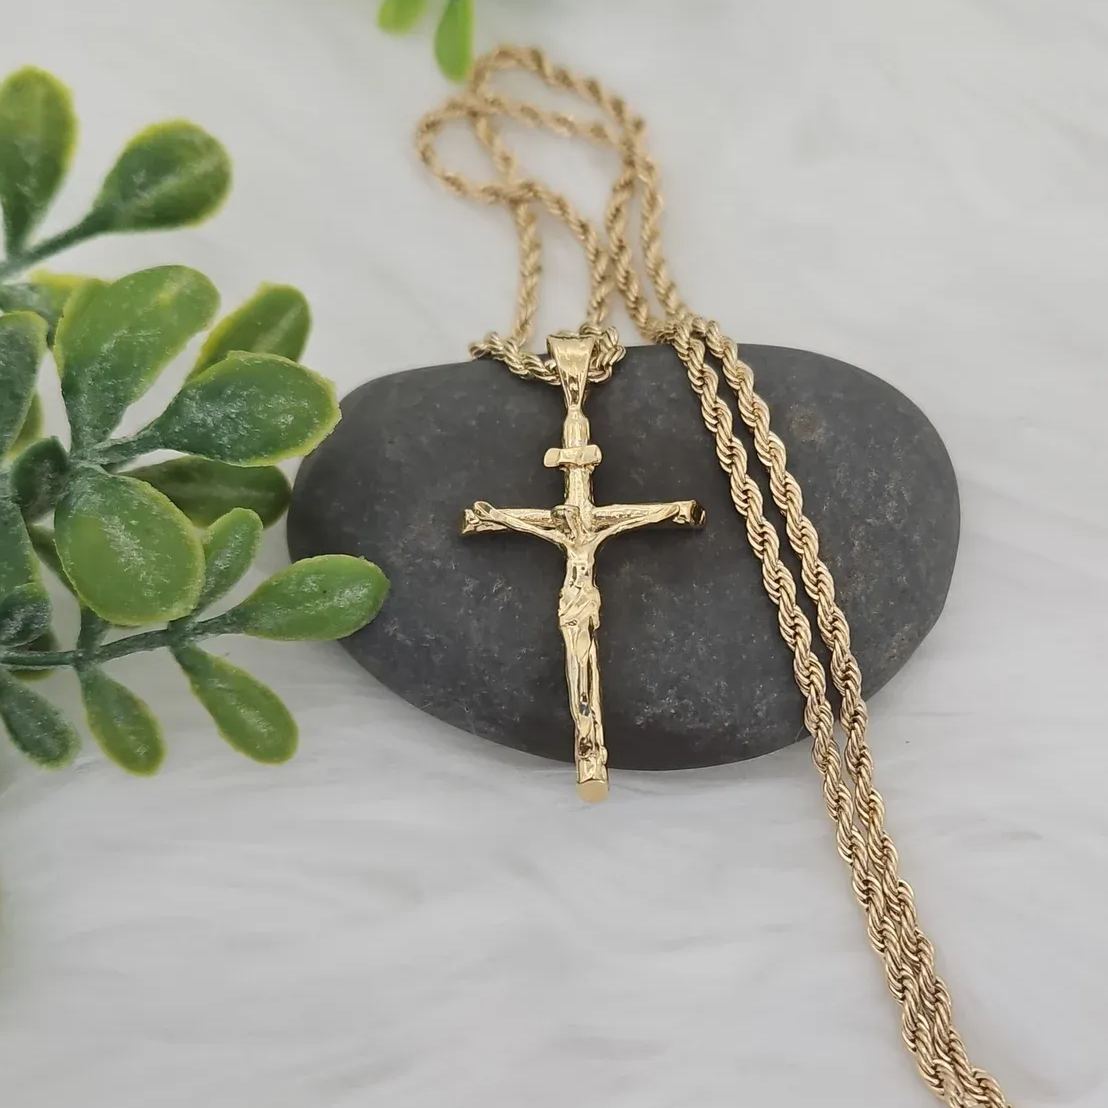 [Copy]Gold Plated Diamond Cut Cross Pendant Rope Chain Cross Necklace